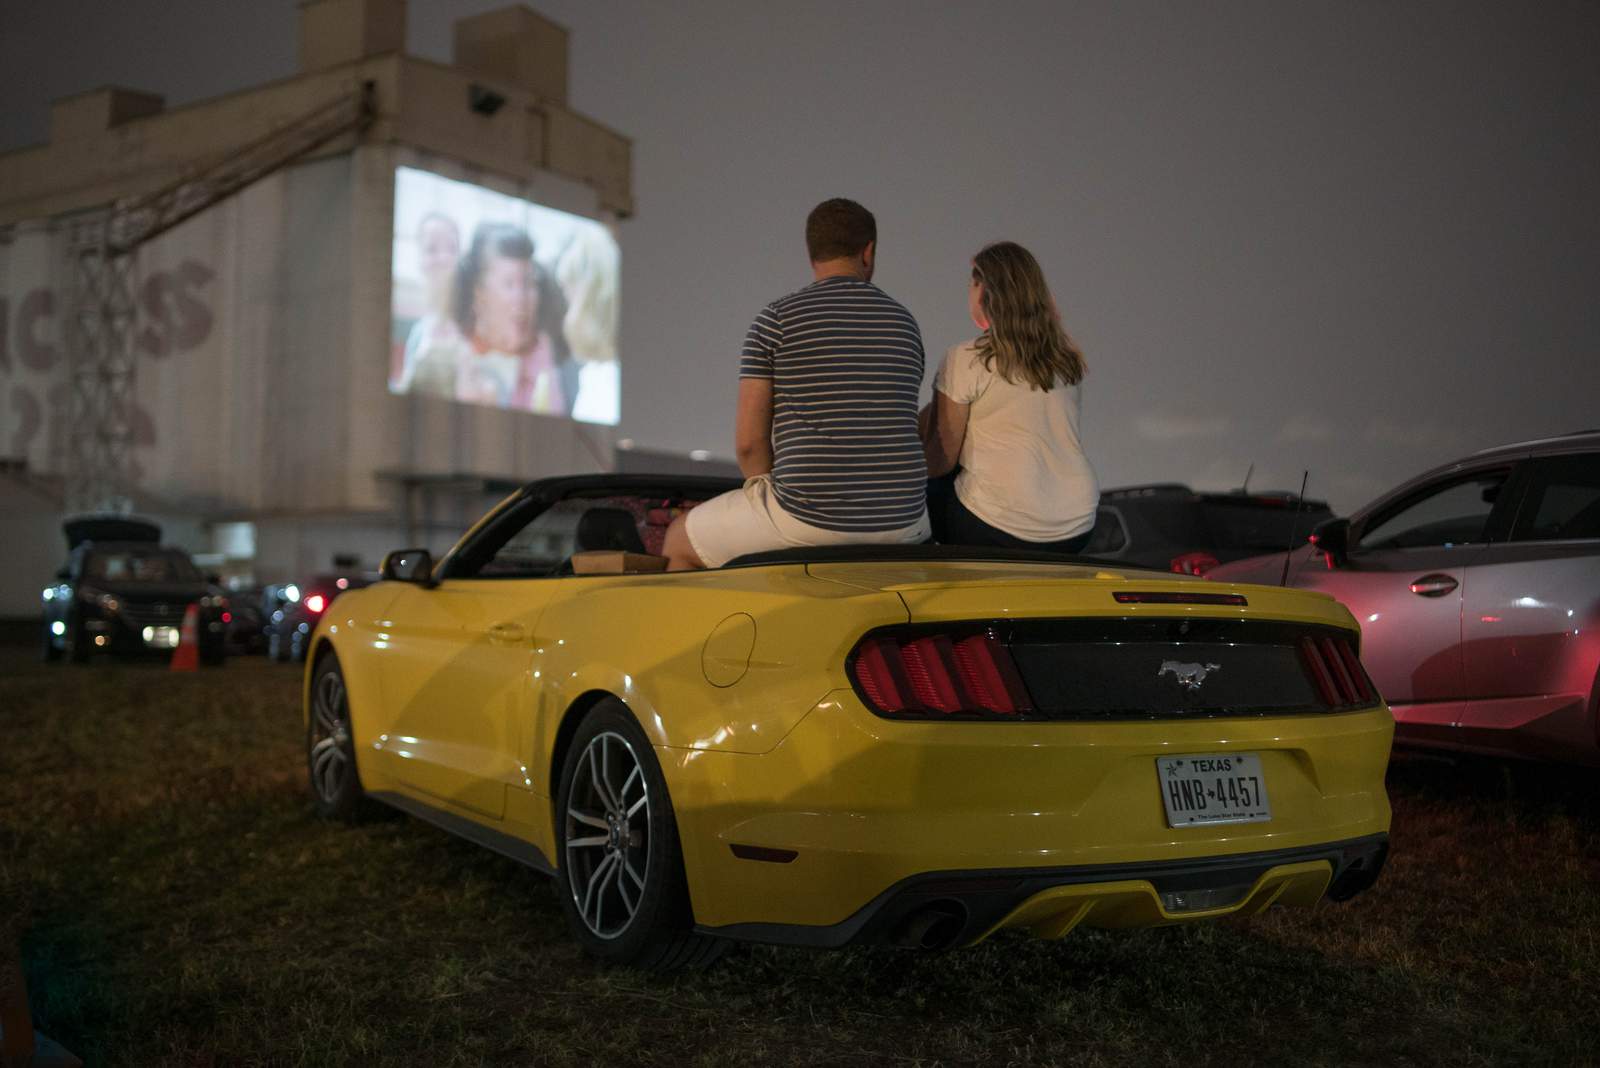 LIST: Sawyer Yards drive-in announces movie screenings for November